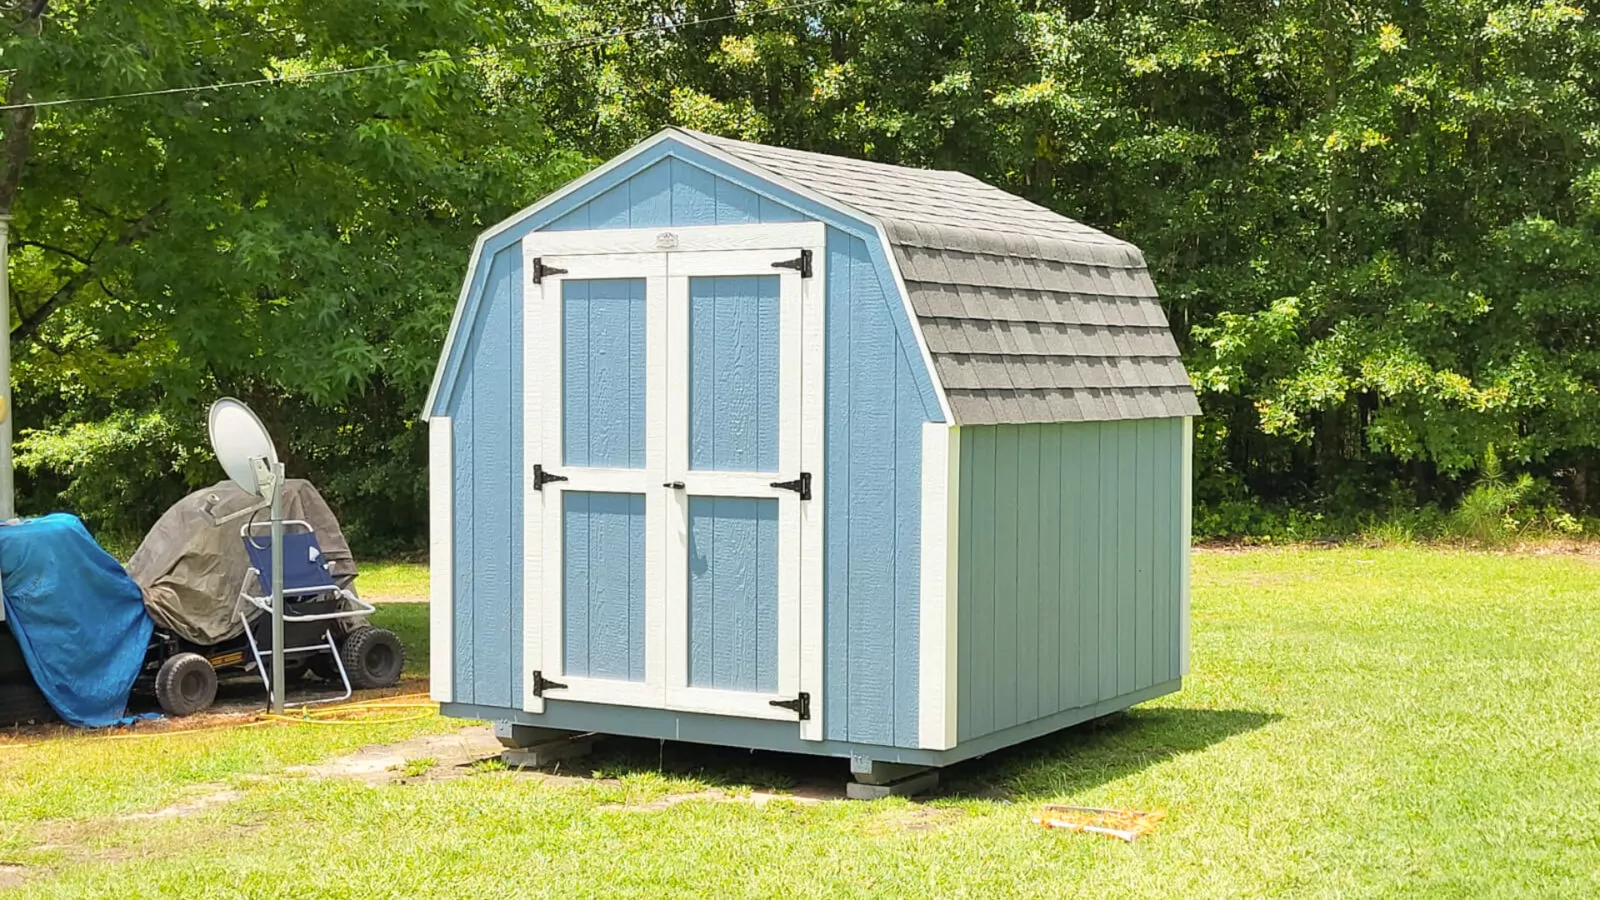 A shed that has a building permit for sheds in GA.